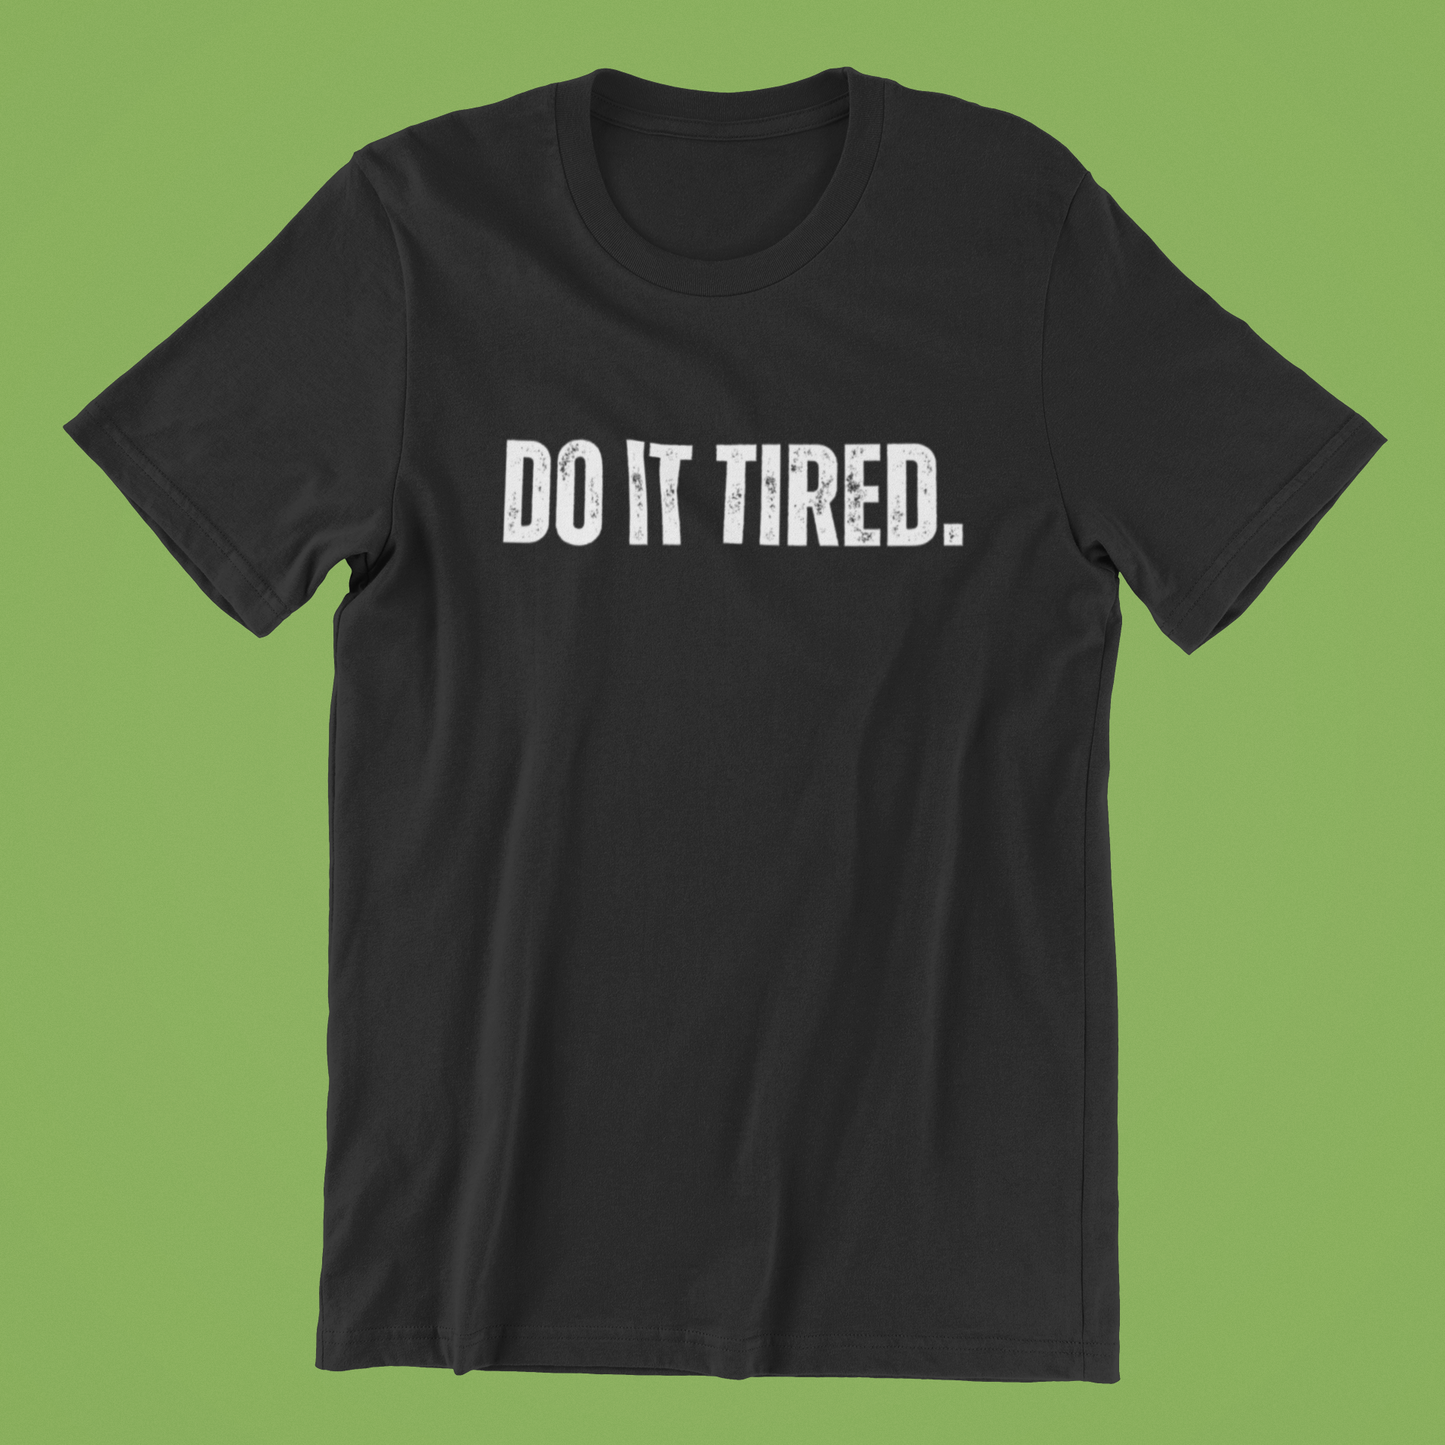 t shirt that says "do it tired"